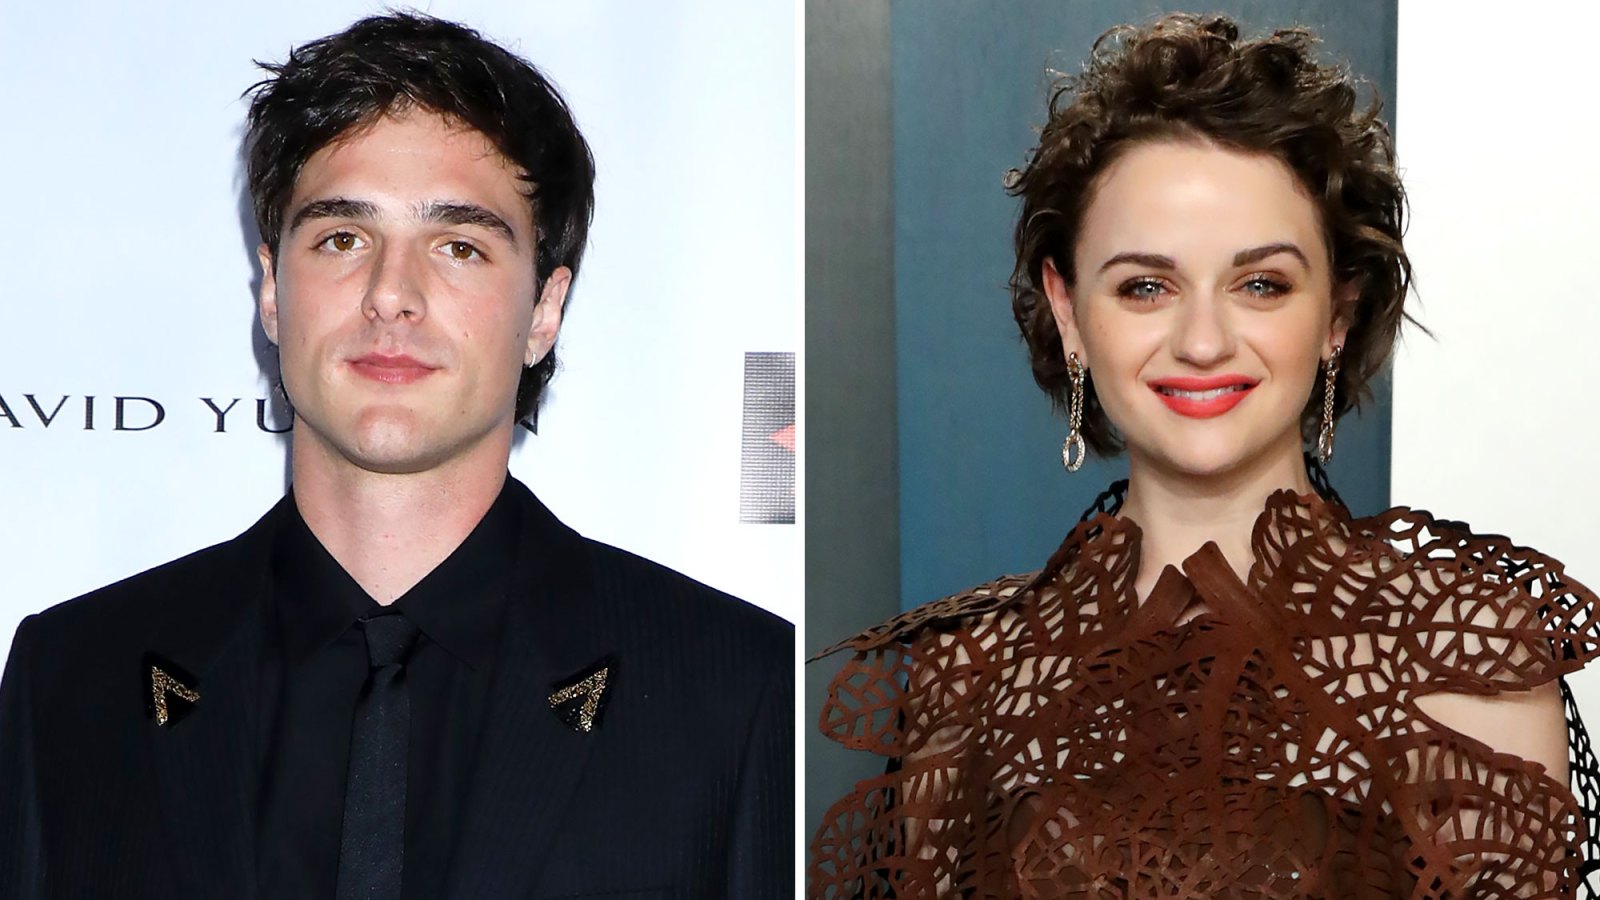 Jacob Elordi Shares 'Kissing Booth' Memory With Ex Joey King